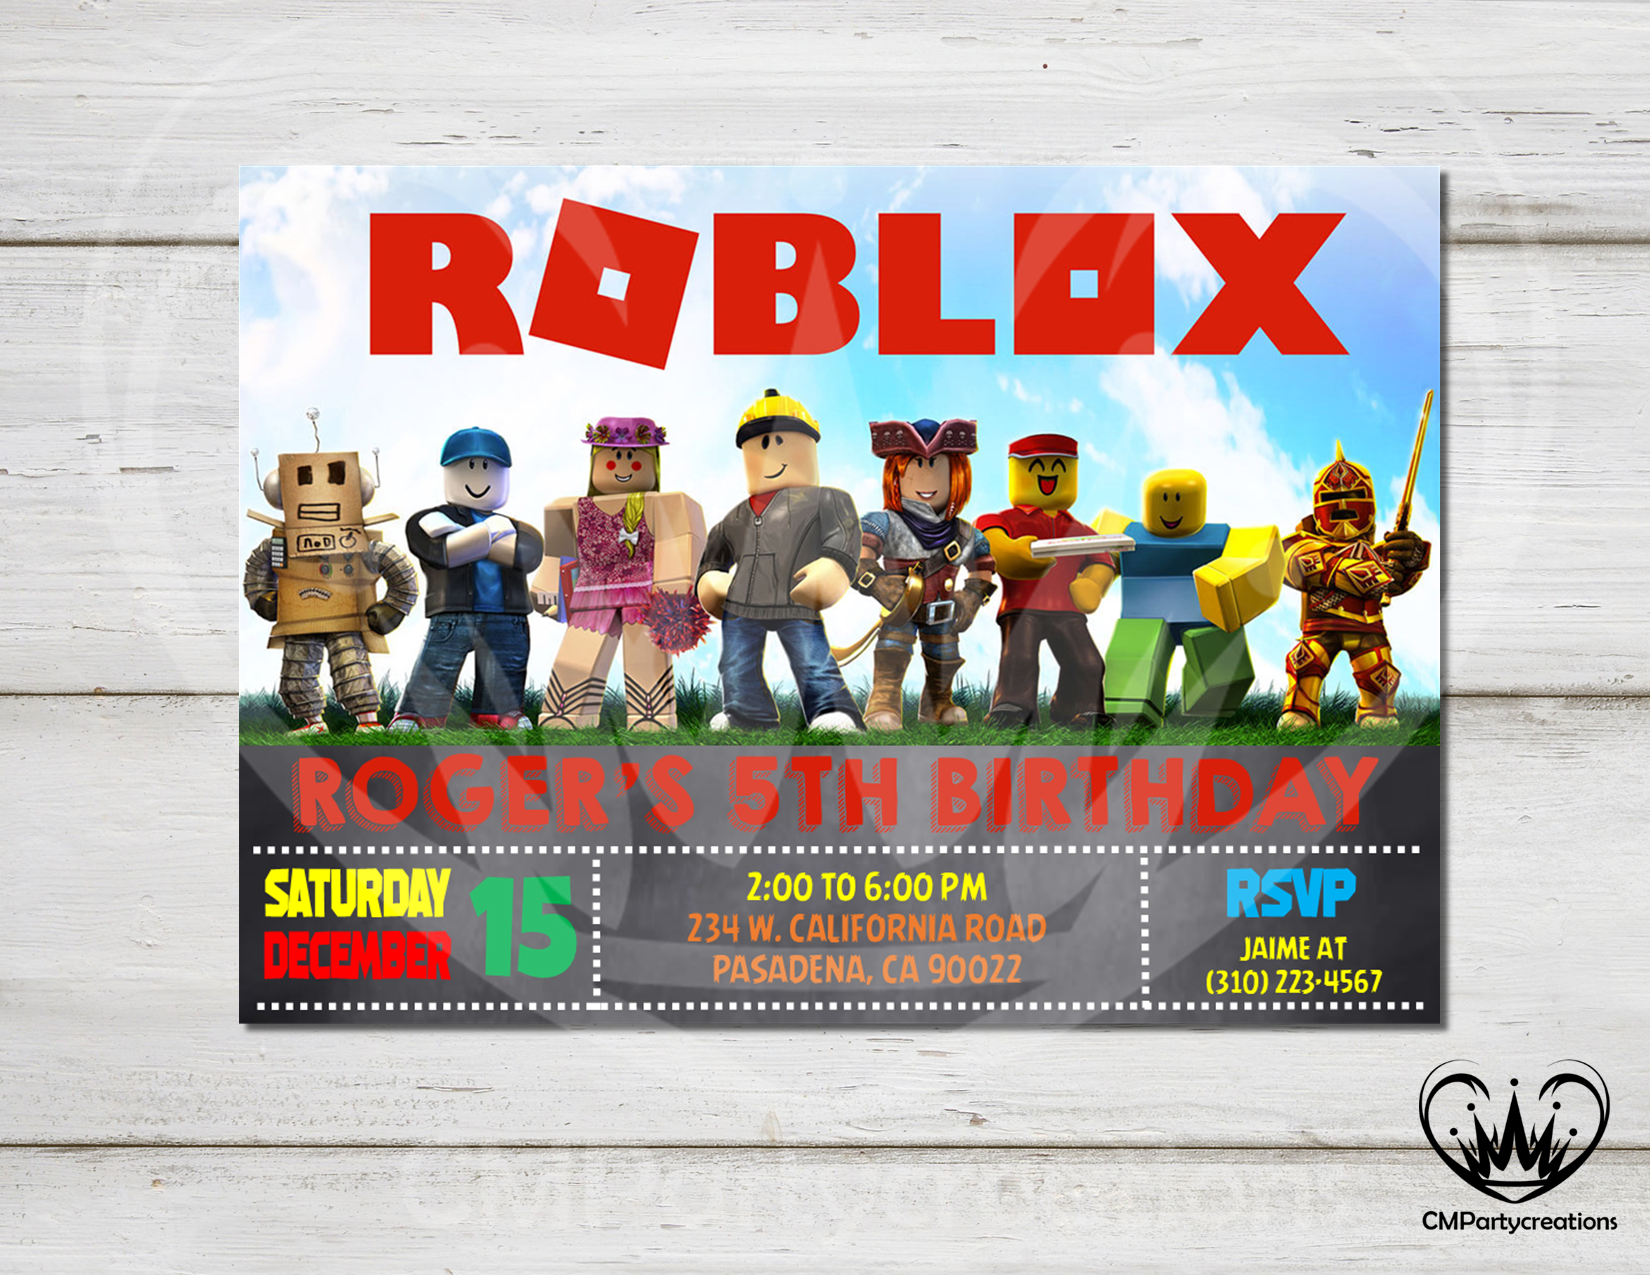 Roblox Group Invitation Birthday Party Cmpartycreations - roblox do you need bc to advertise